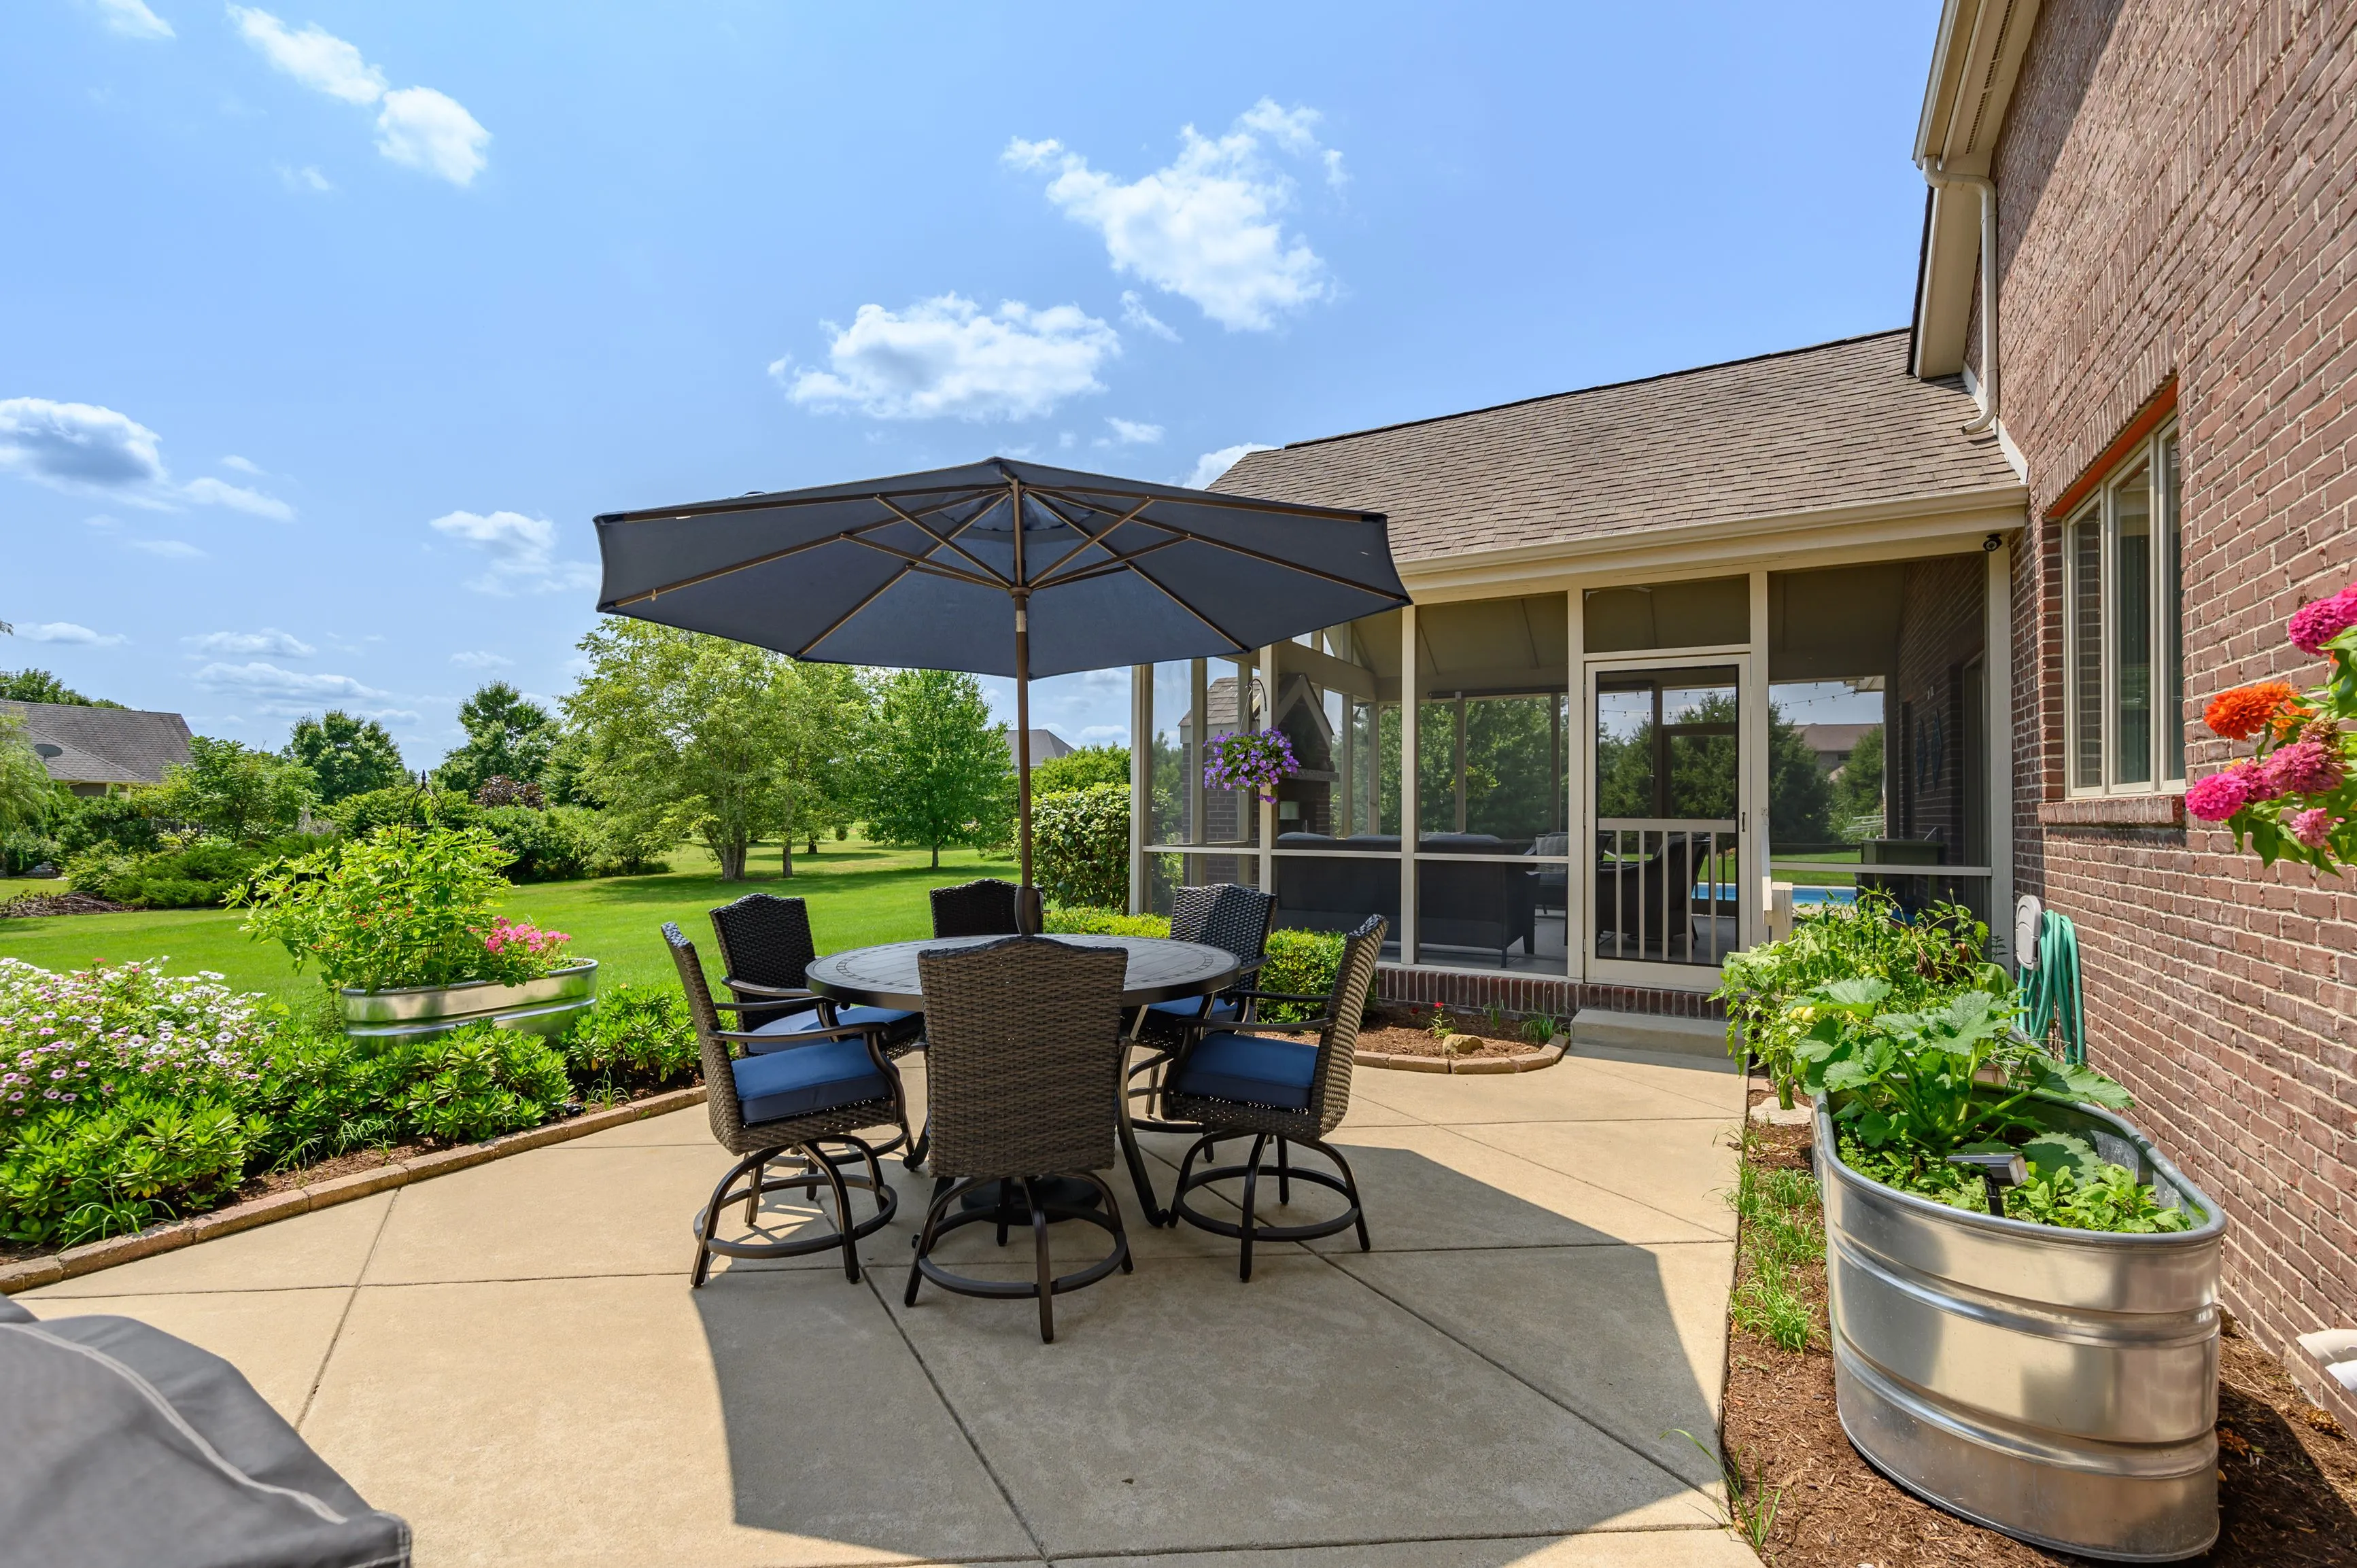 Outdoor patio area with dining table set under an umbrella, next to a brick house with a screened porch and a clear blue sky in the background.